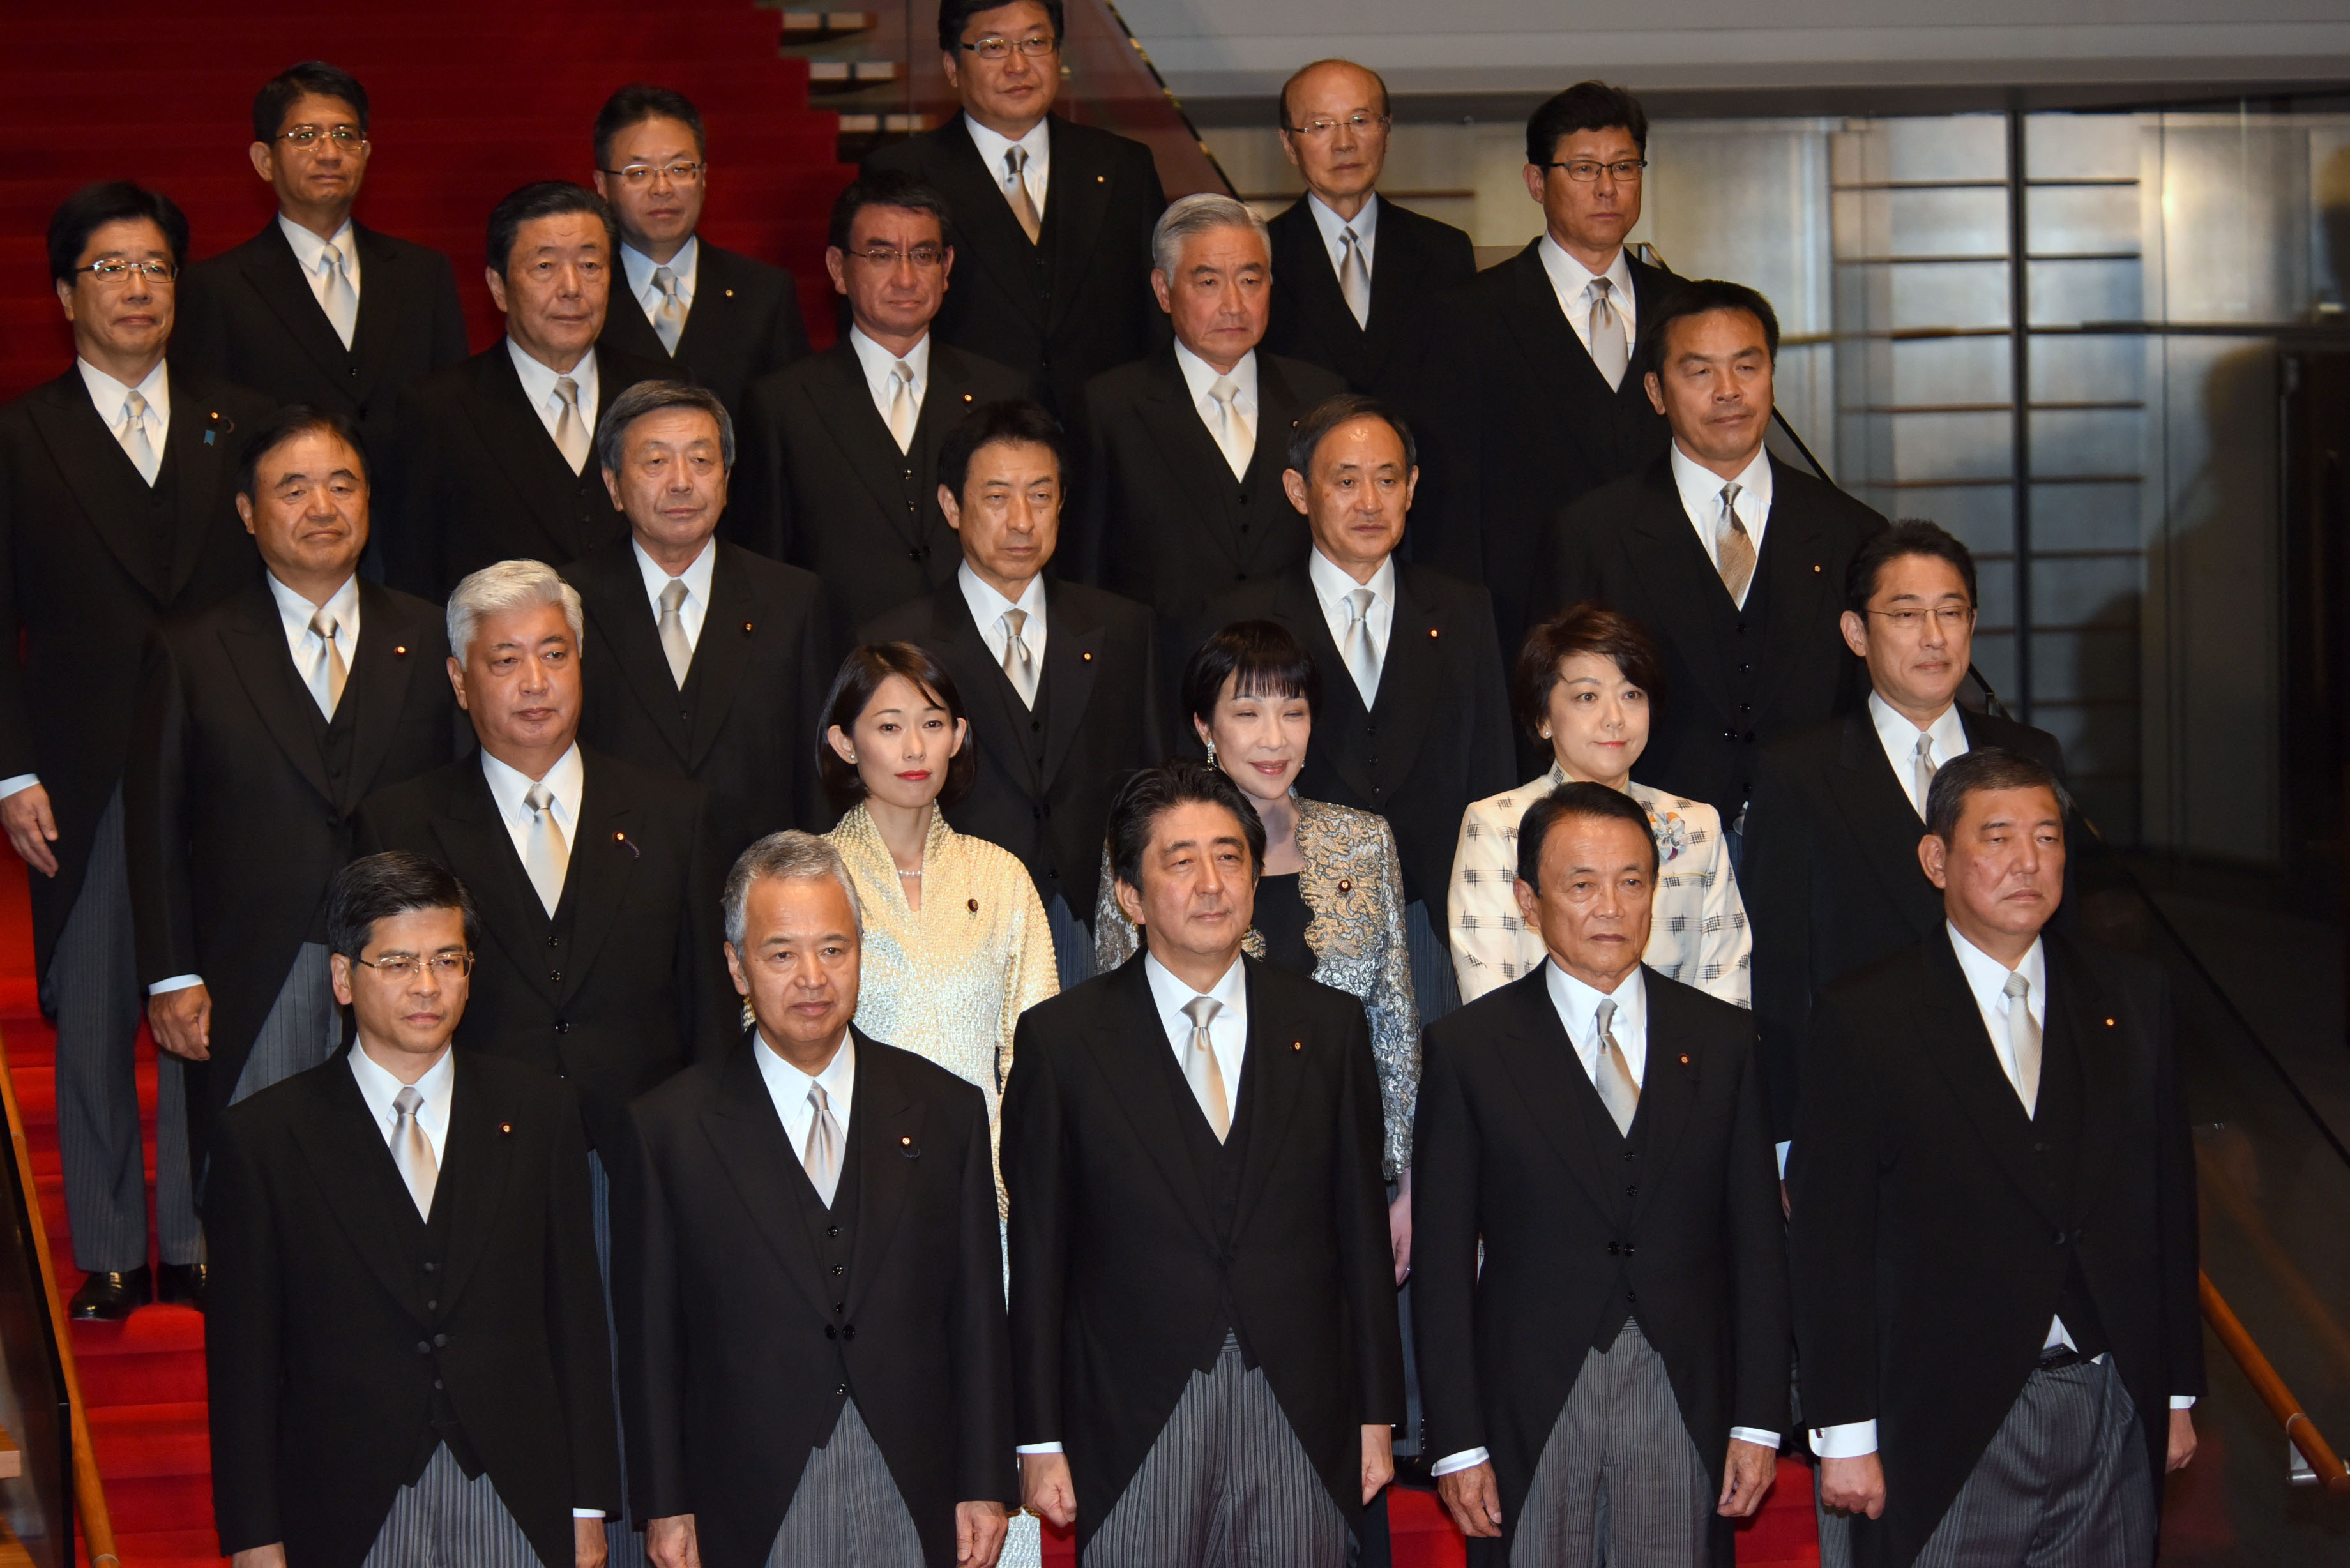 In Cabinet reshuffle, Abe shifts focus to economy but retains key ministers  | The Japan Times